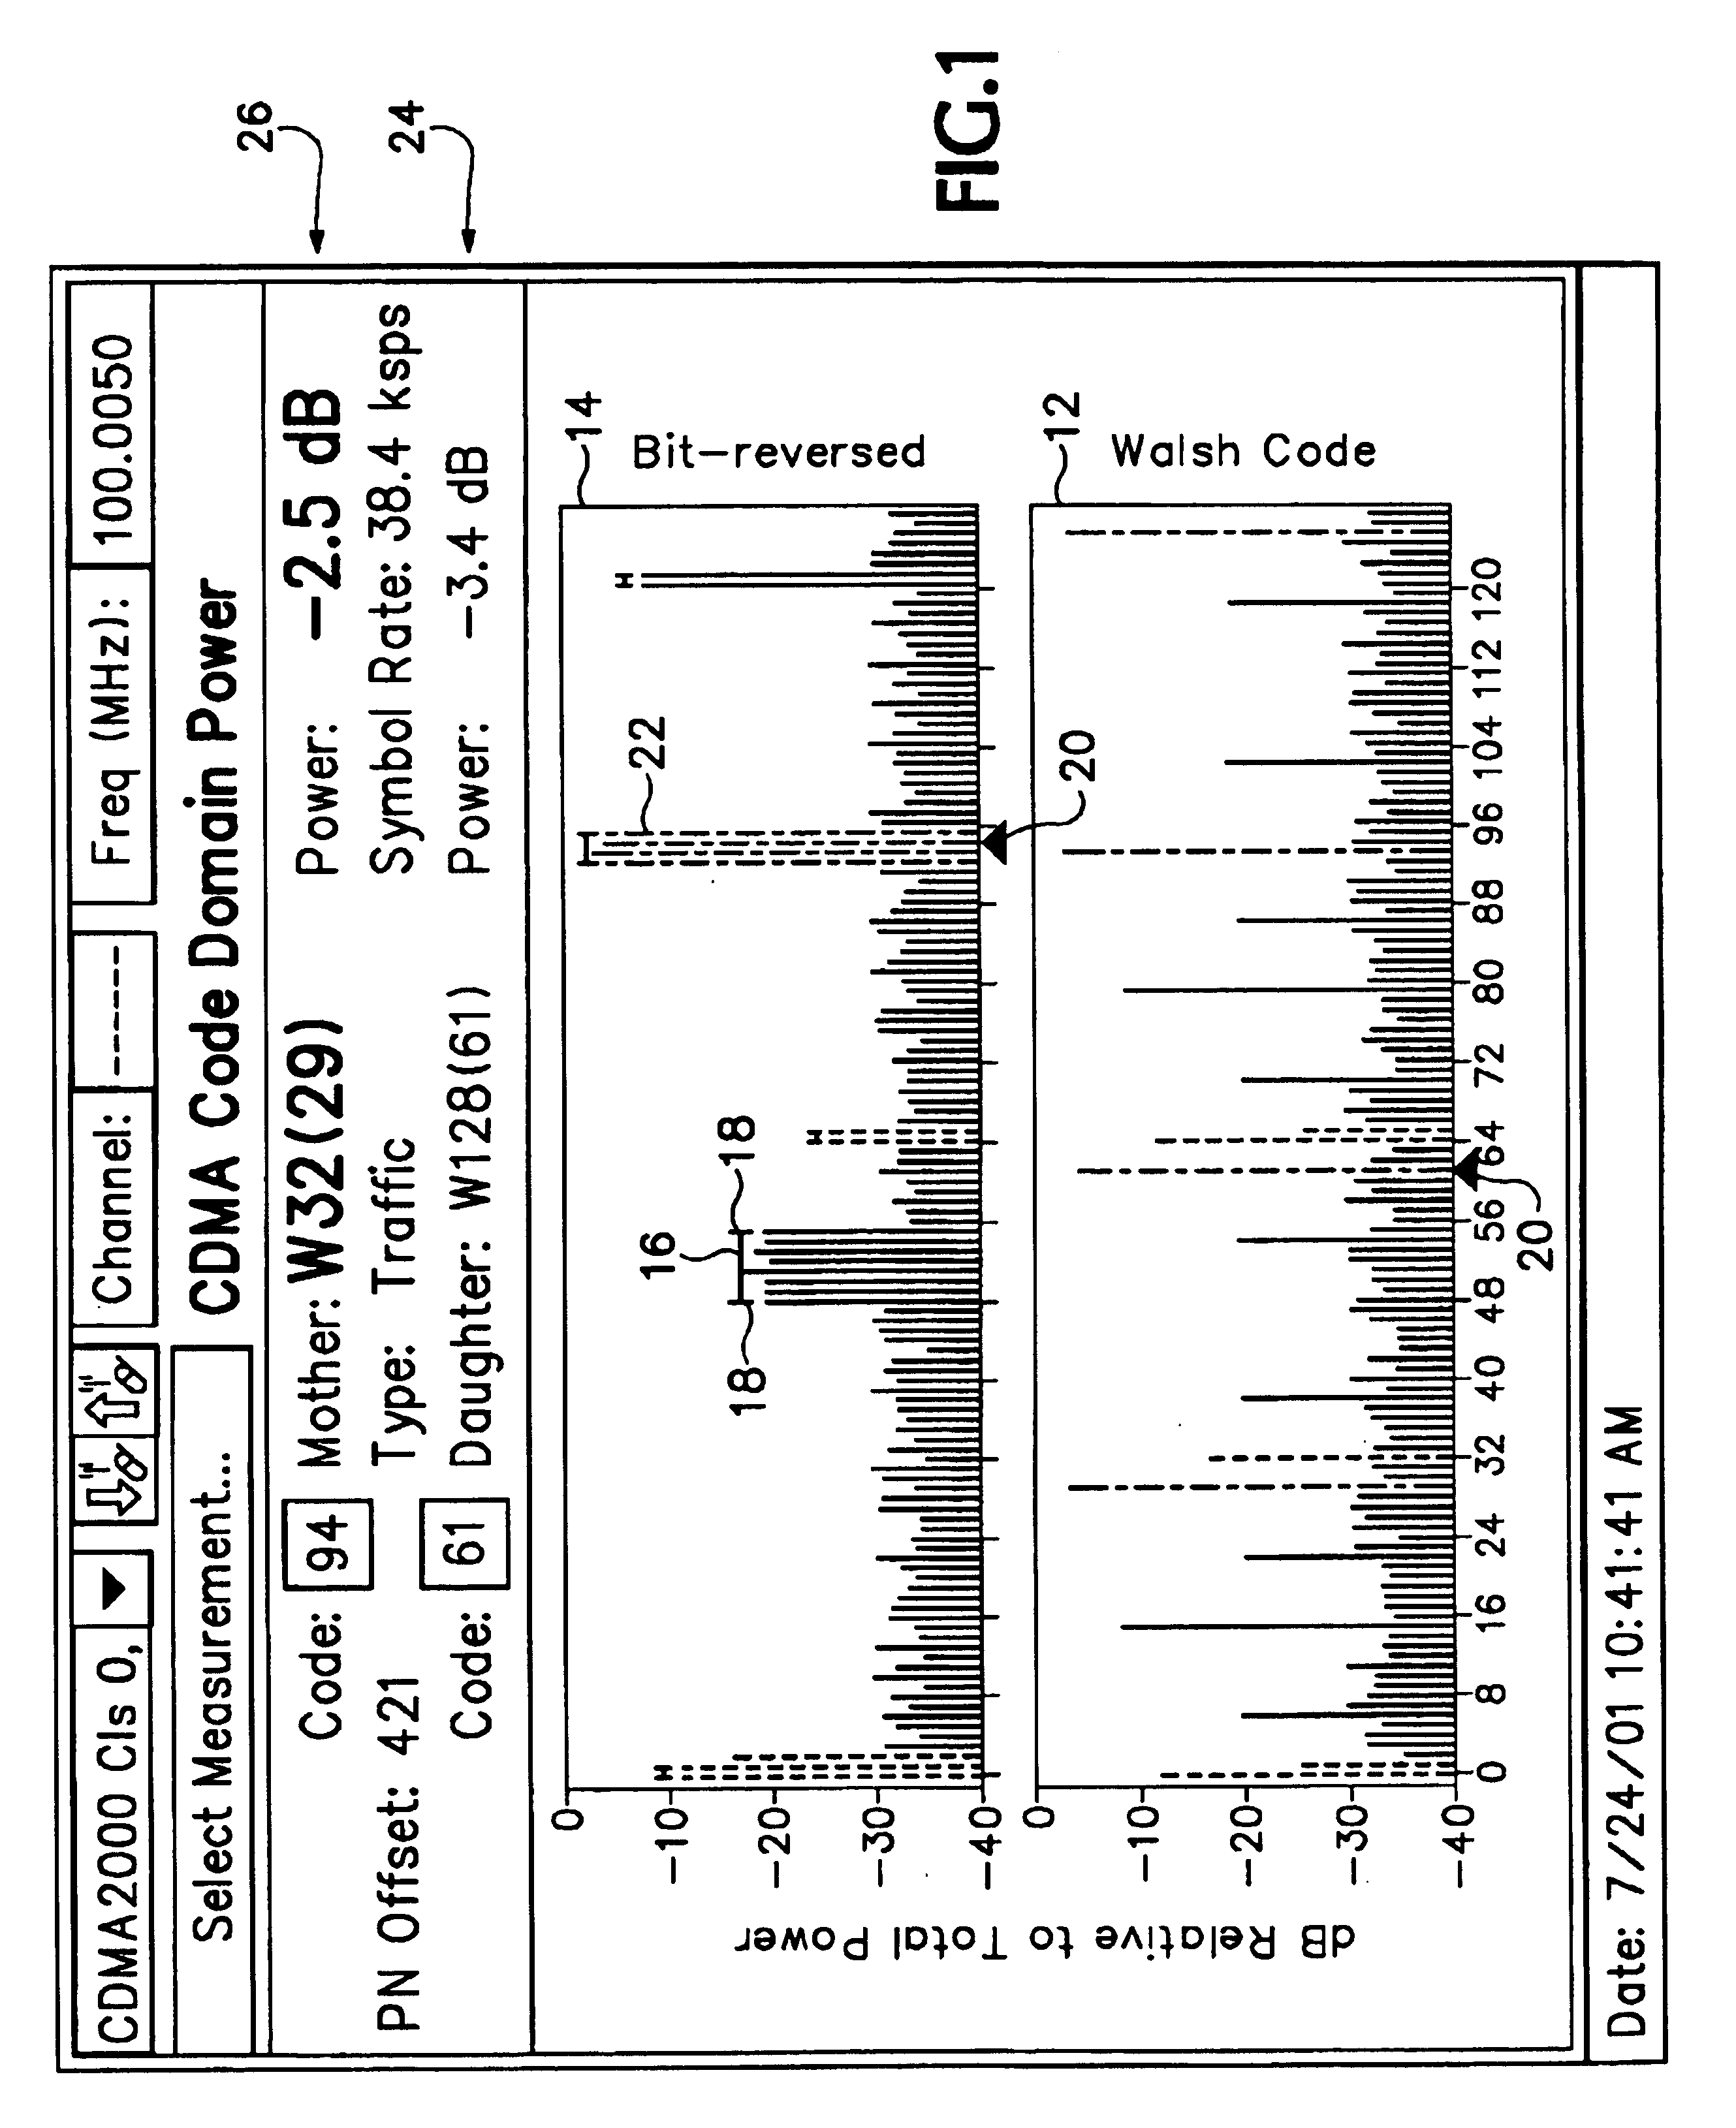 Display of code power levels and relationships of multiple spreading factor orthogonal codes in a CDMA signal